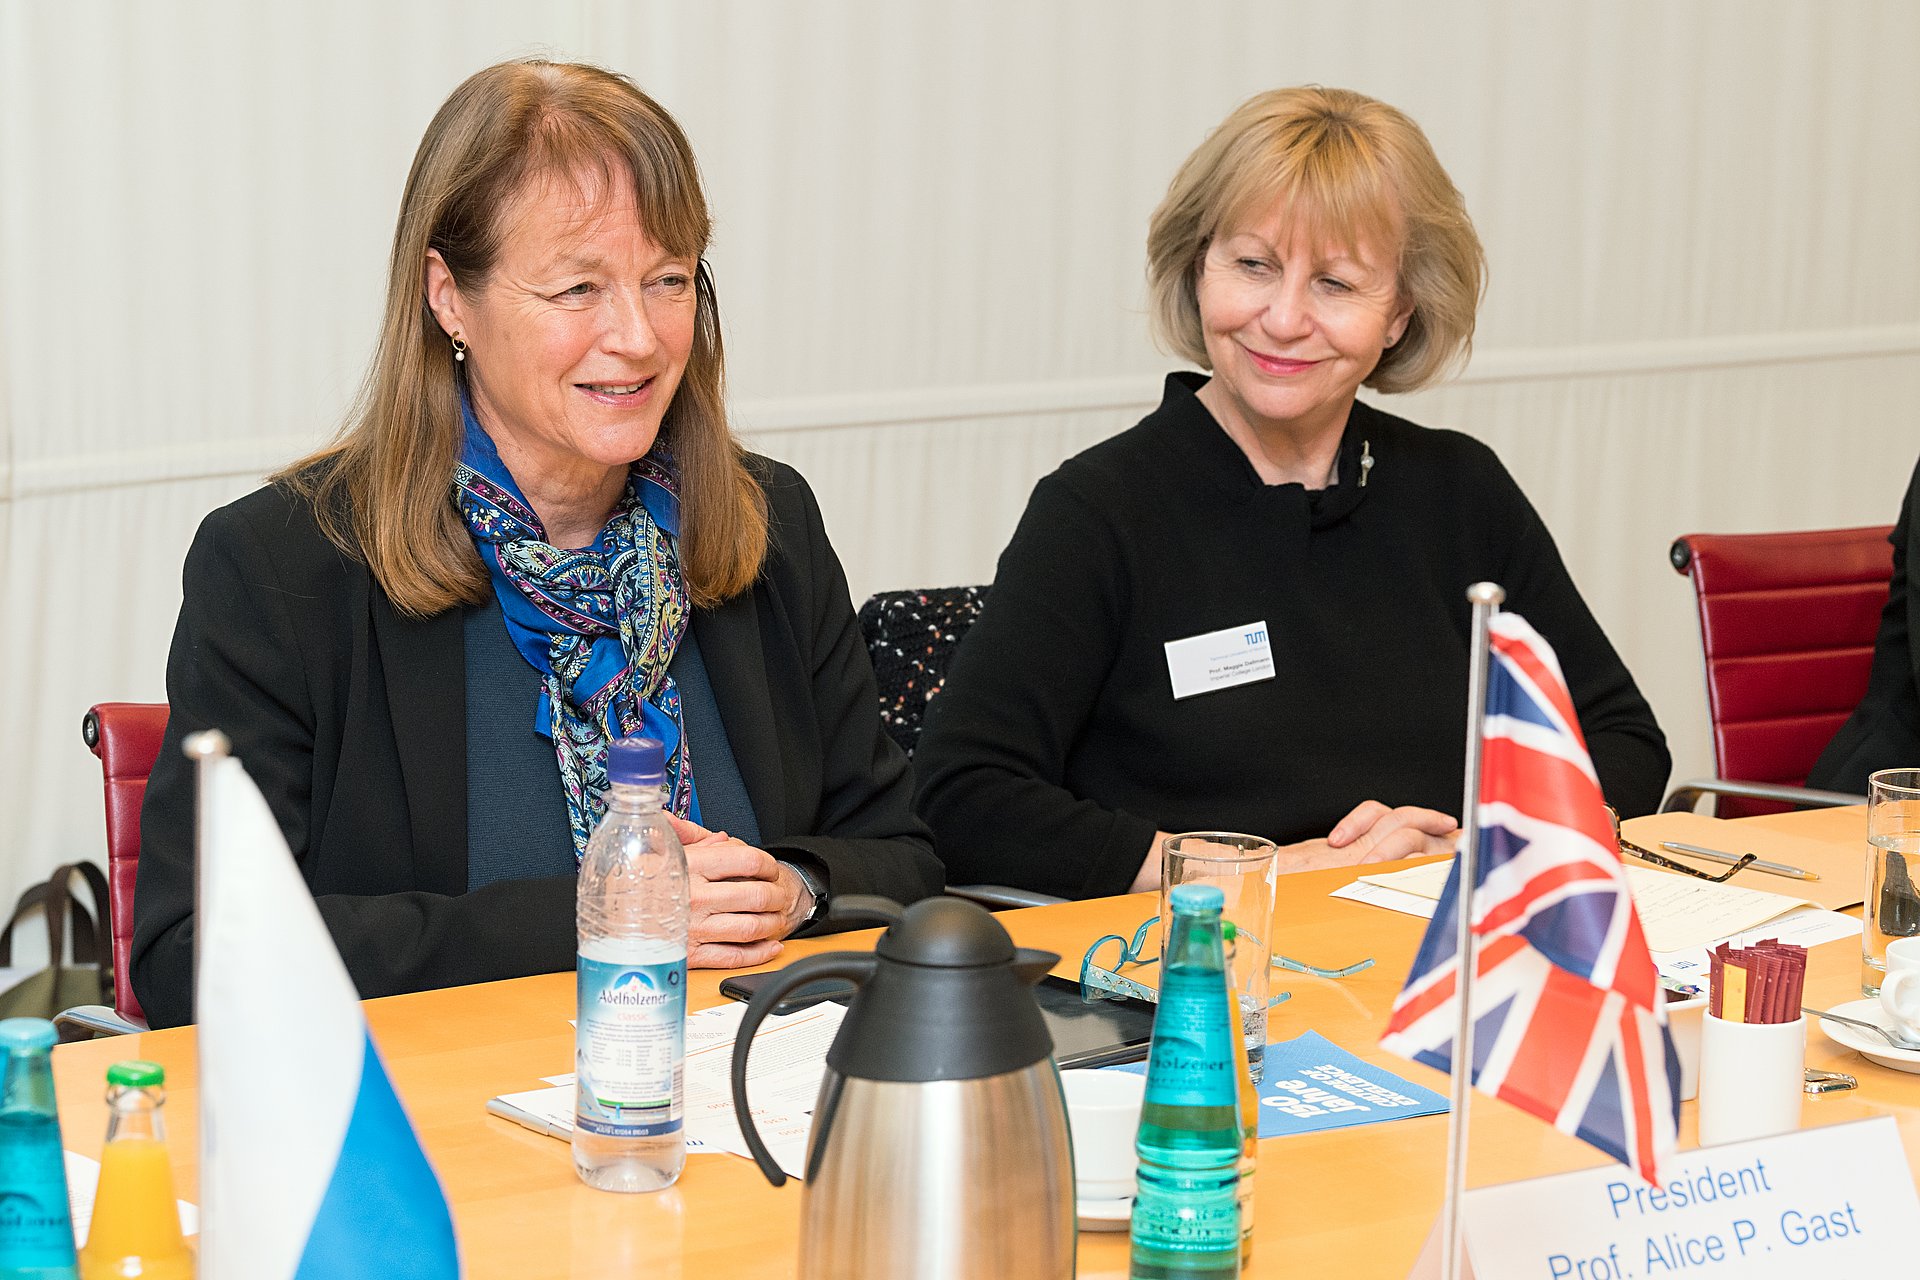 ICL President Alice P. Gast (l.) and Maggie Dallman, ICL Vice-President International visited TUM together with a delegation of professors from ICL (Photo: Uli Benz)